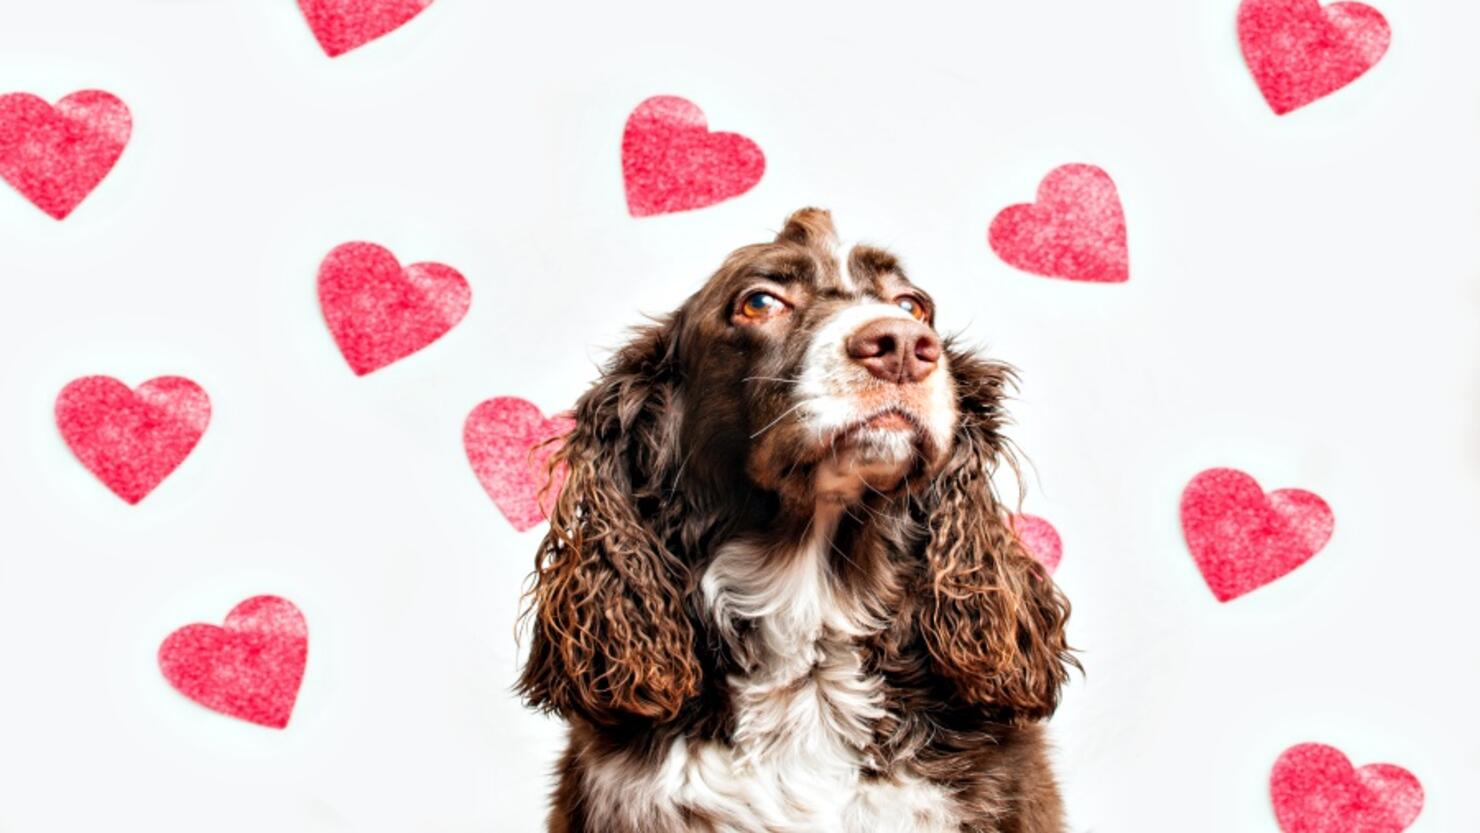 Dog Over White Background With Red Heart Shapes